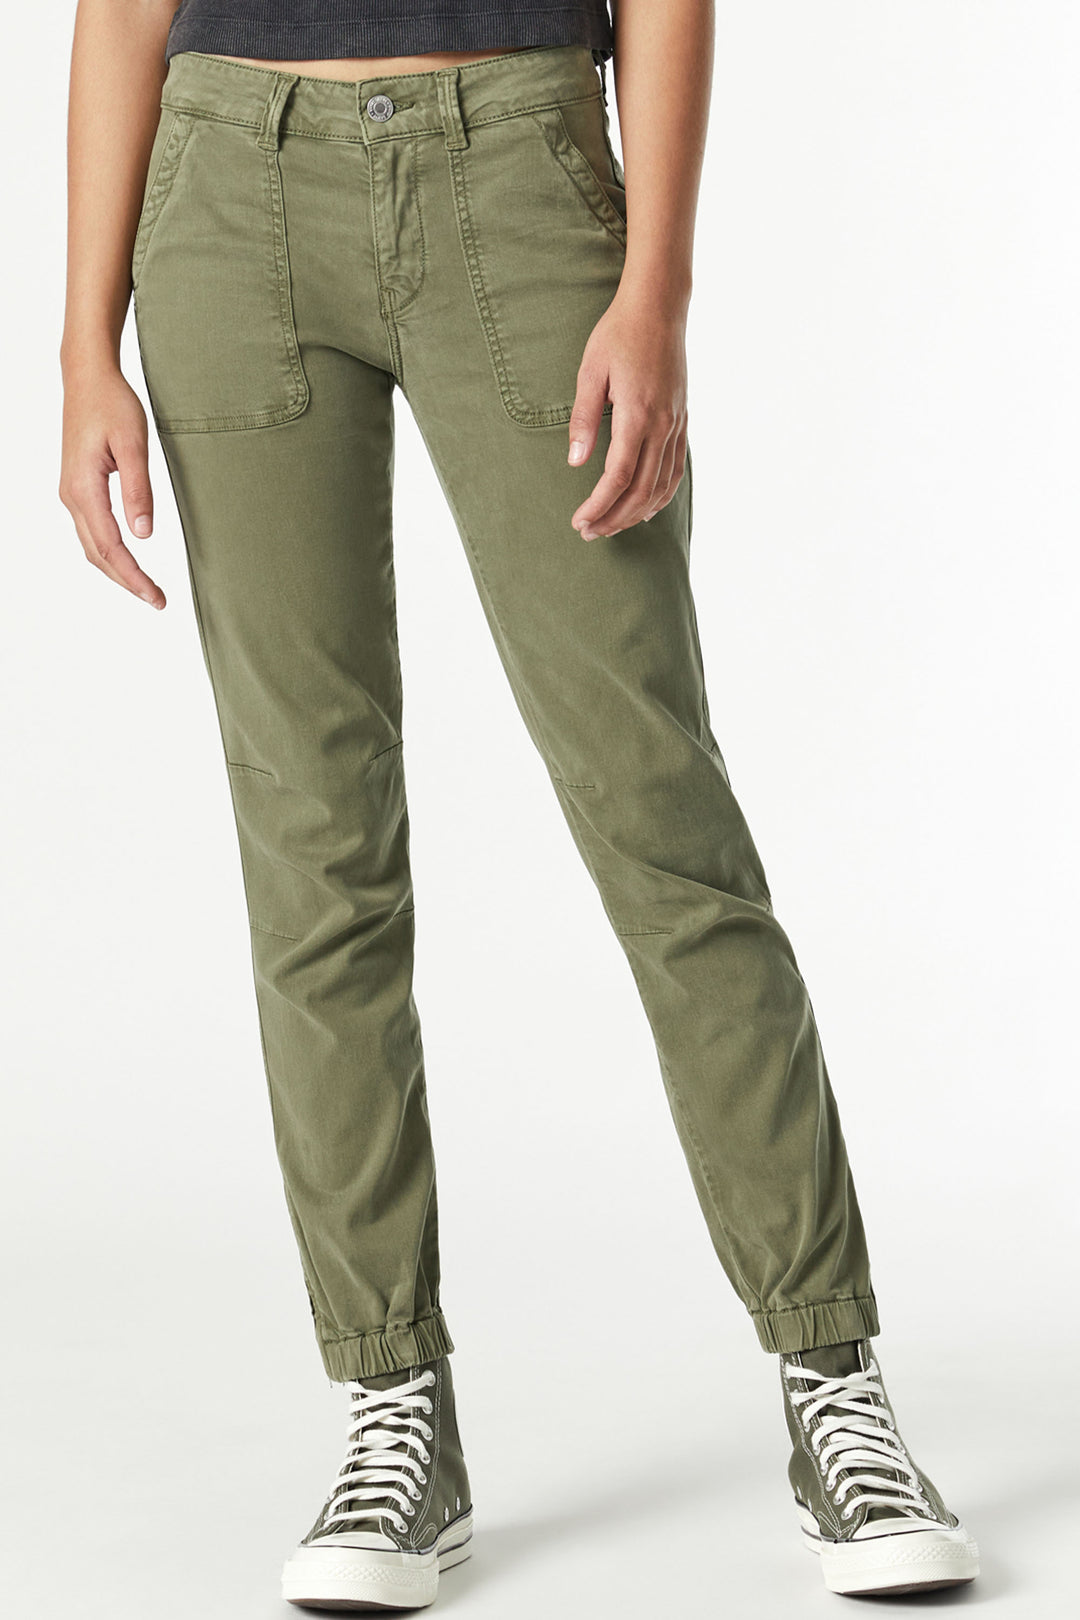 Mavi Jeans Spring 2023 women's casual slim fit cropped green cotton cargo pant - front